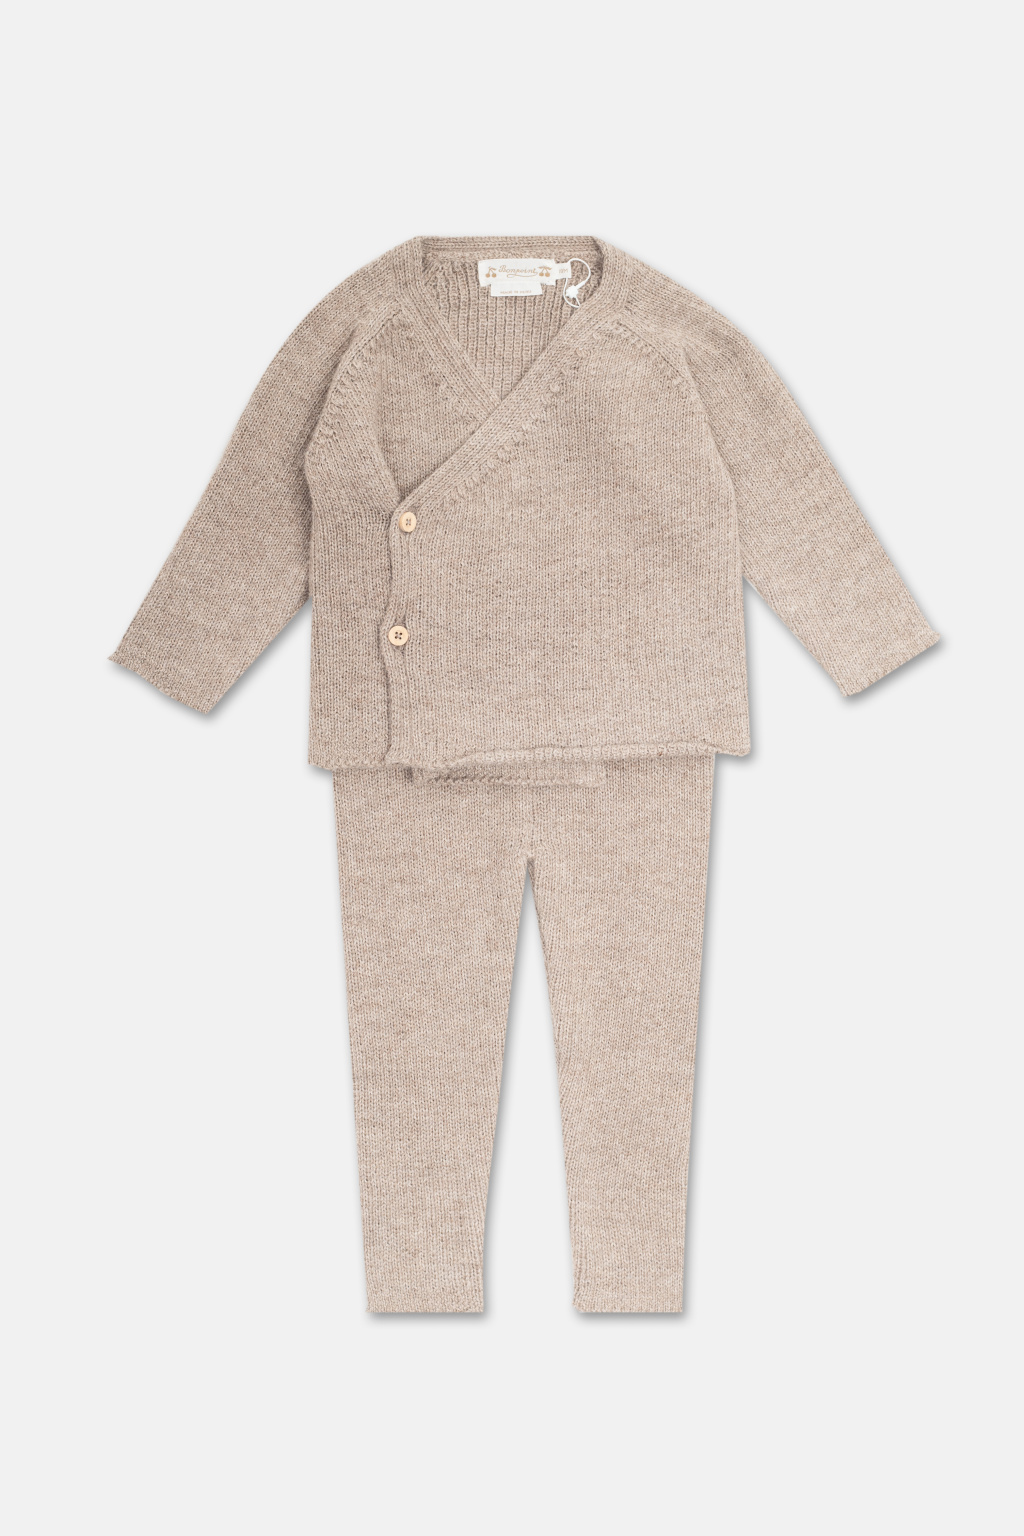 Bonpoint  Baby top and trousers set